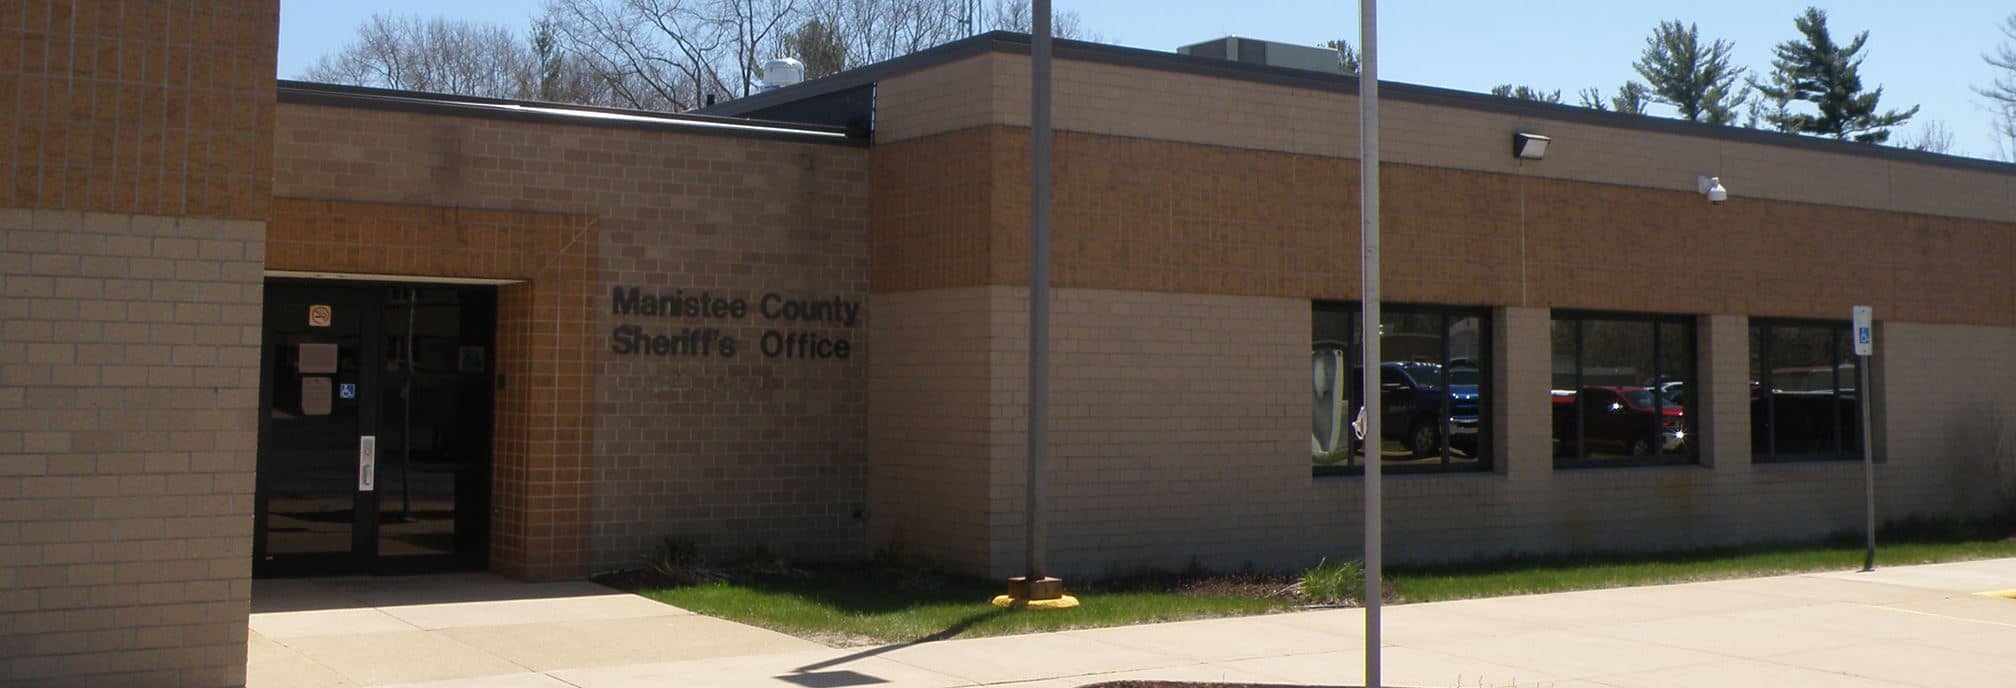 Image of Manistee County Sheriff's Office